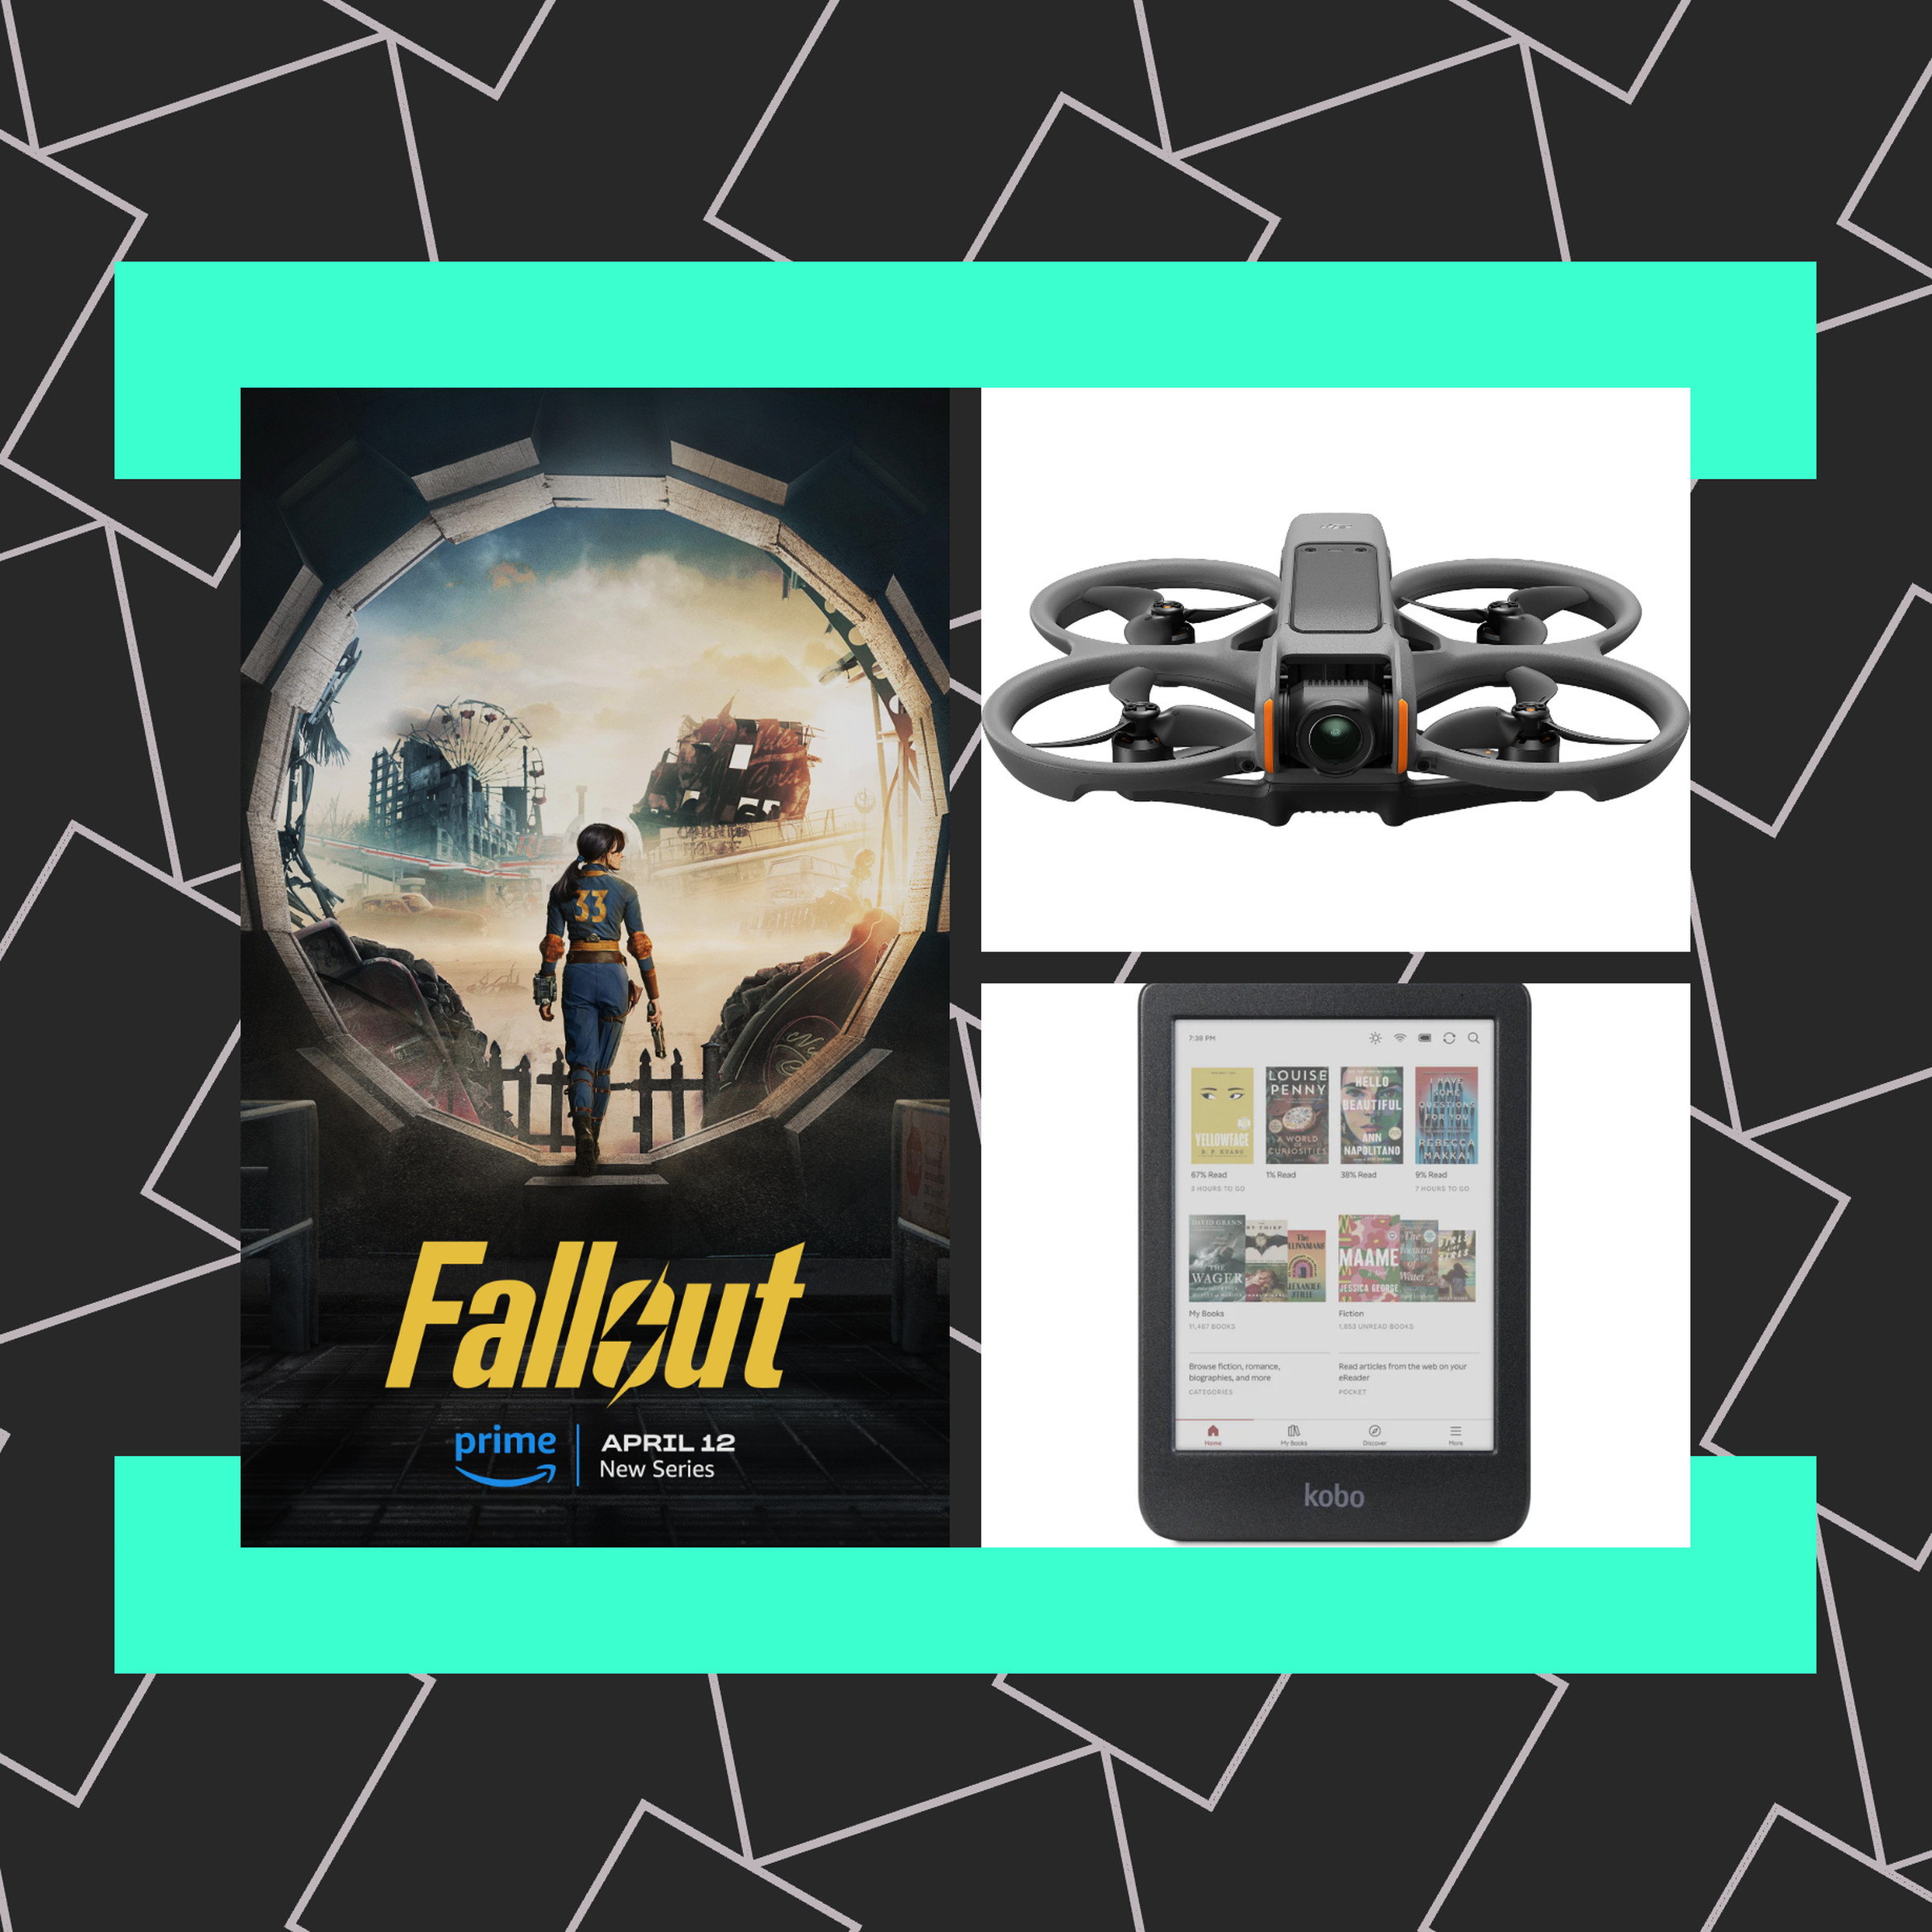 An illustration of a drone, a Kobo reader, and the Fallout TV show, over the Installer logo.